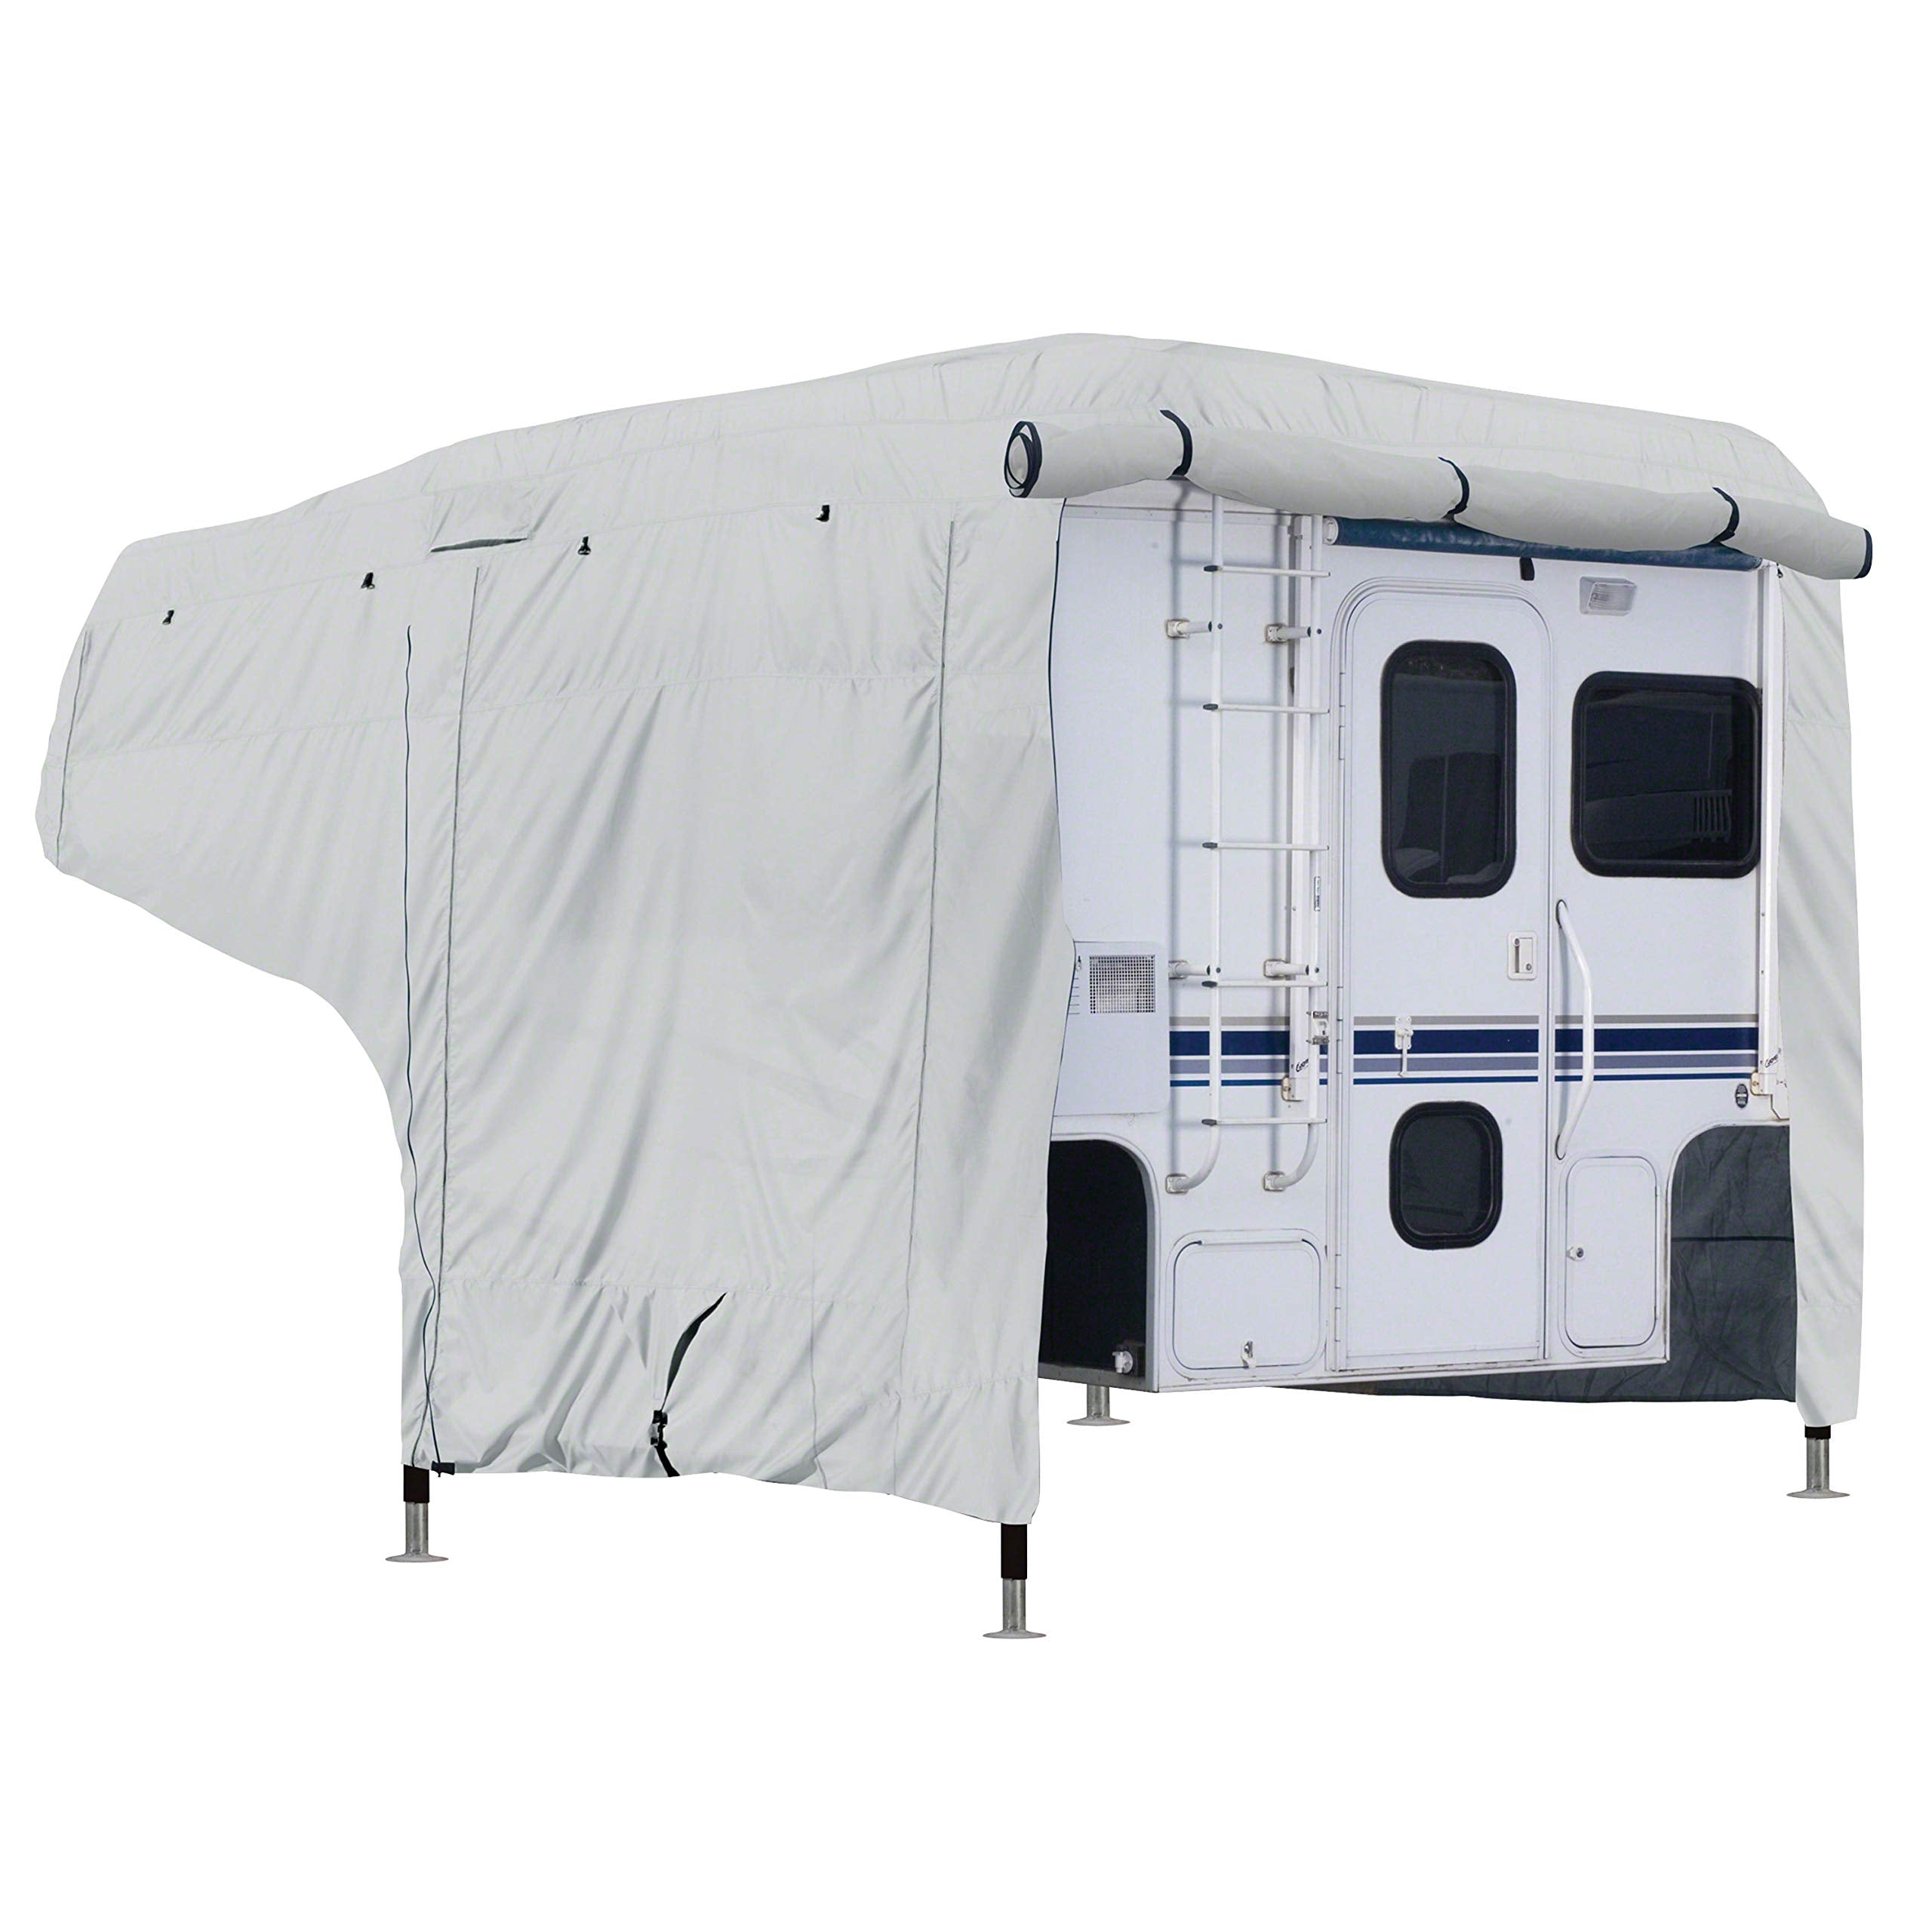 Classic Accessories OverDrive PermaPRO Deluxe Camper Cover, Fits 8' - 10'